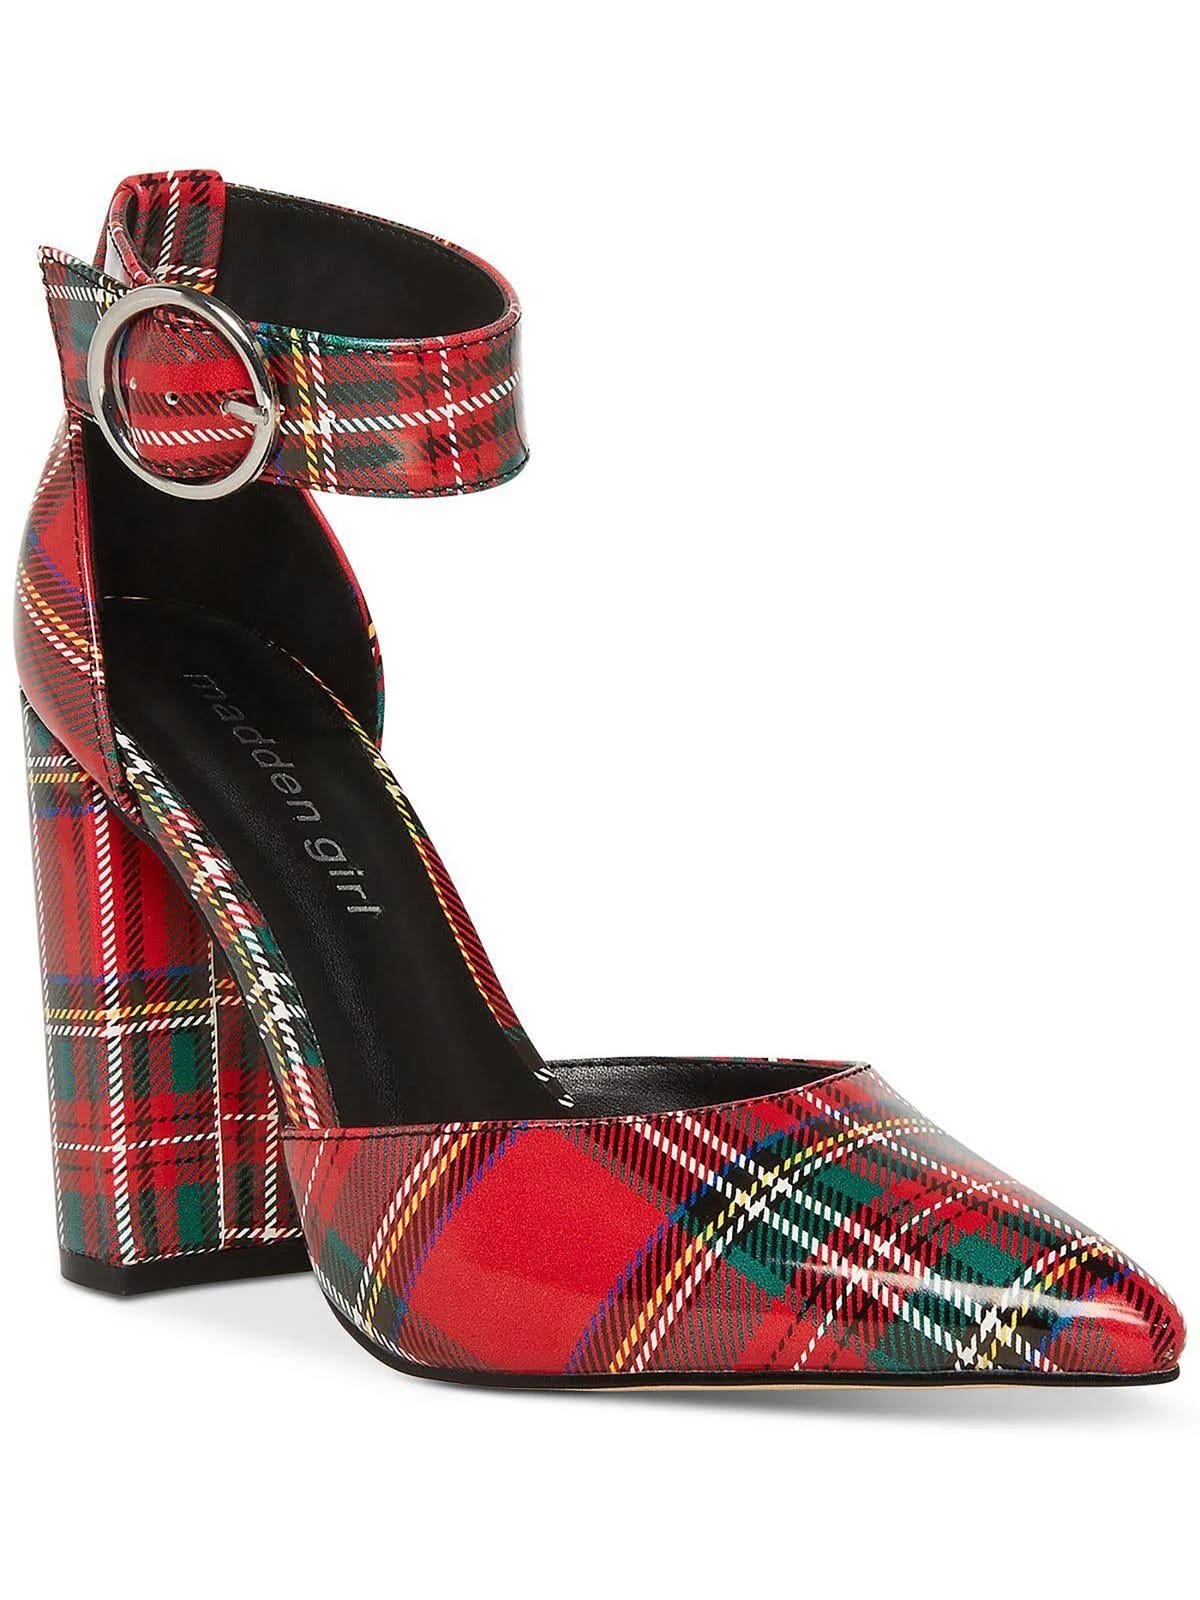 Red Plaid Pumps by Madden Girl for Fashionable Women | Image